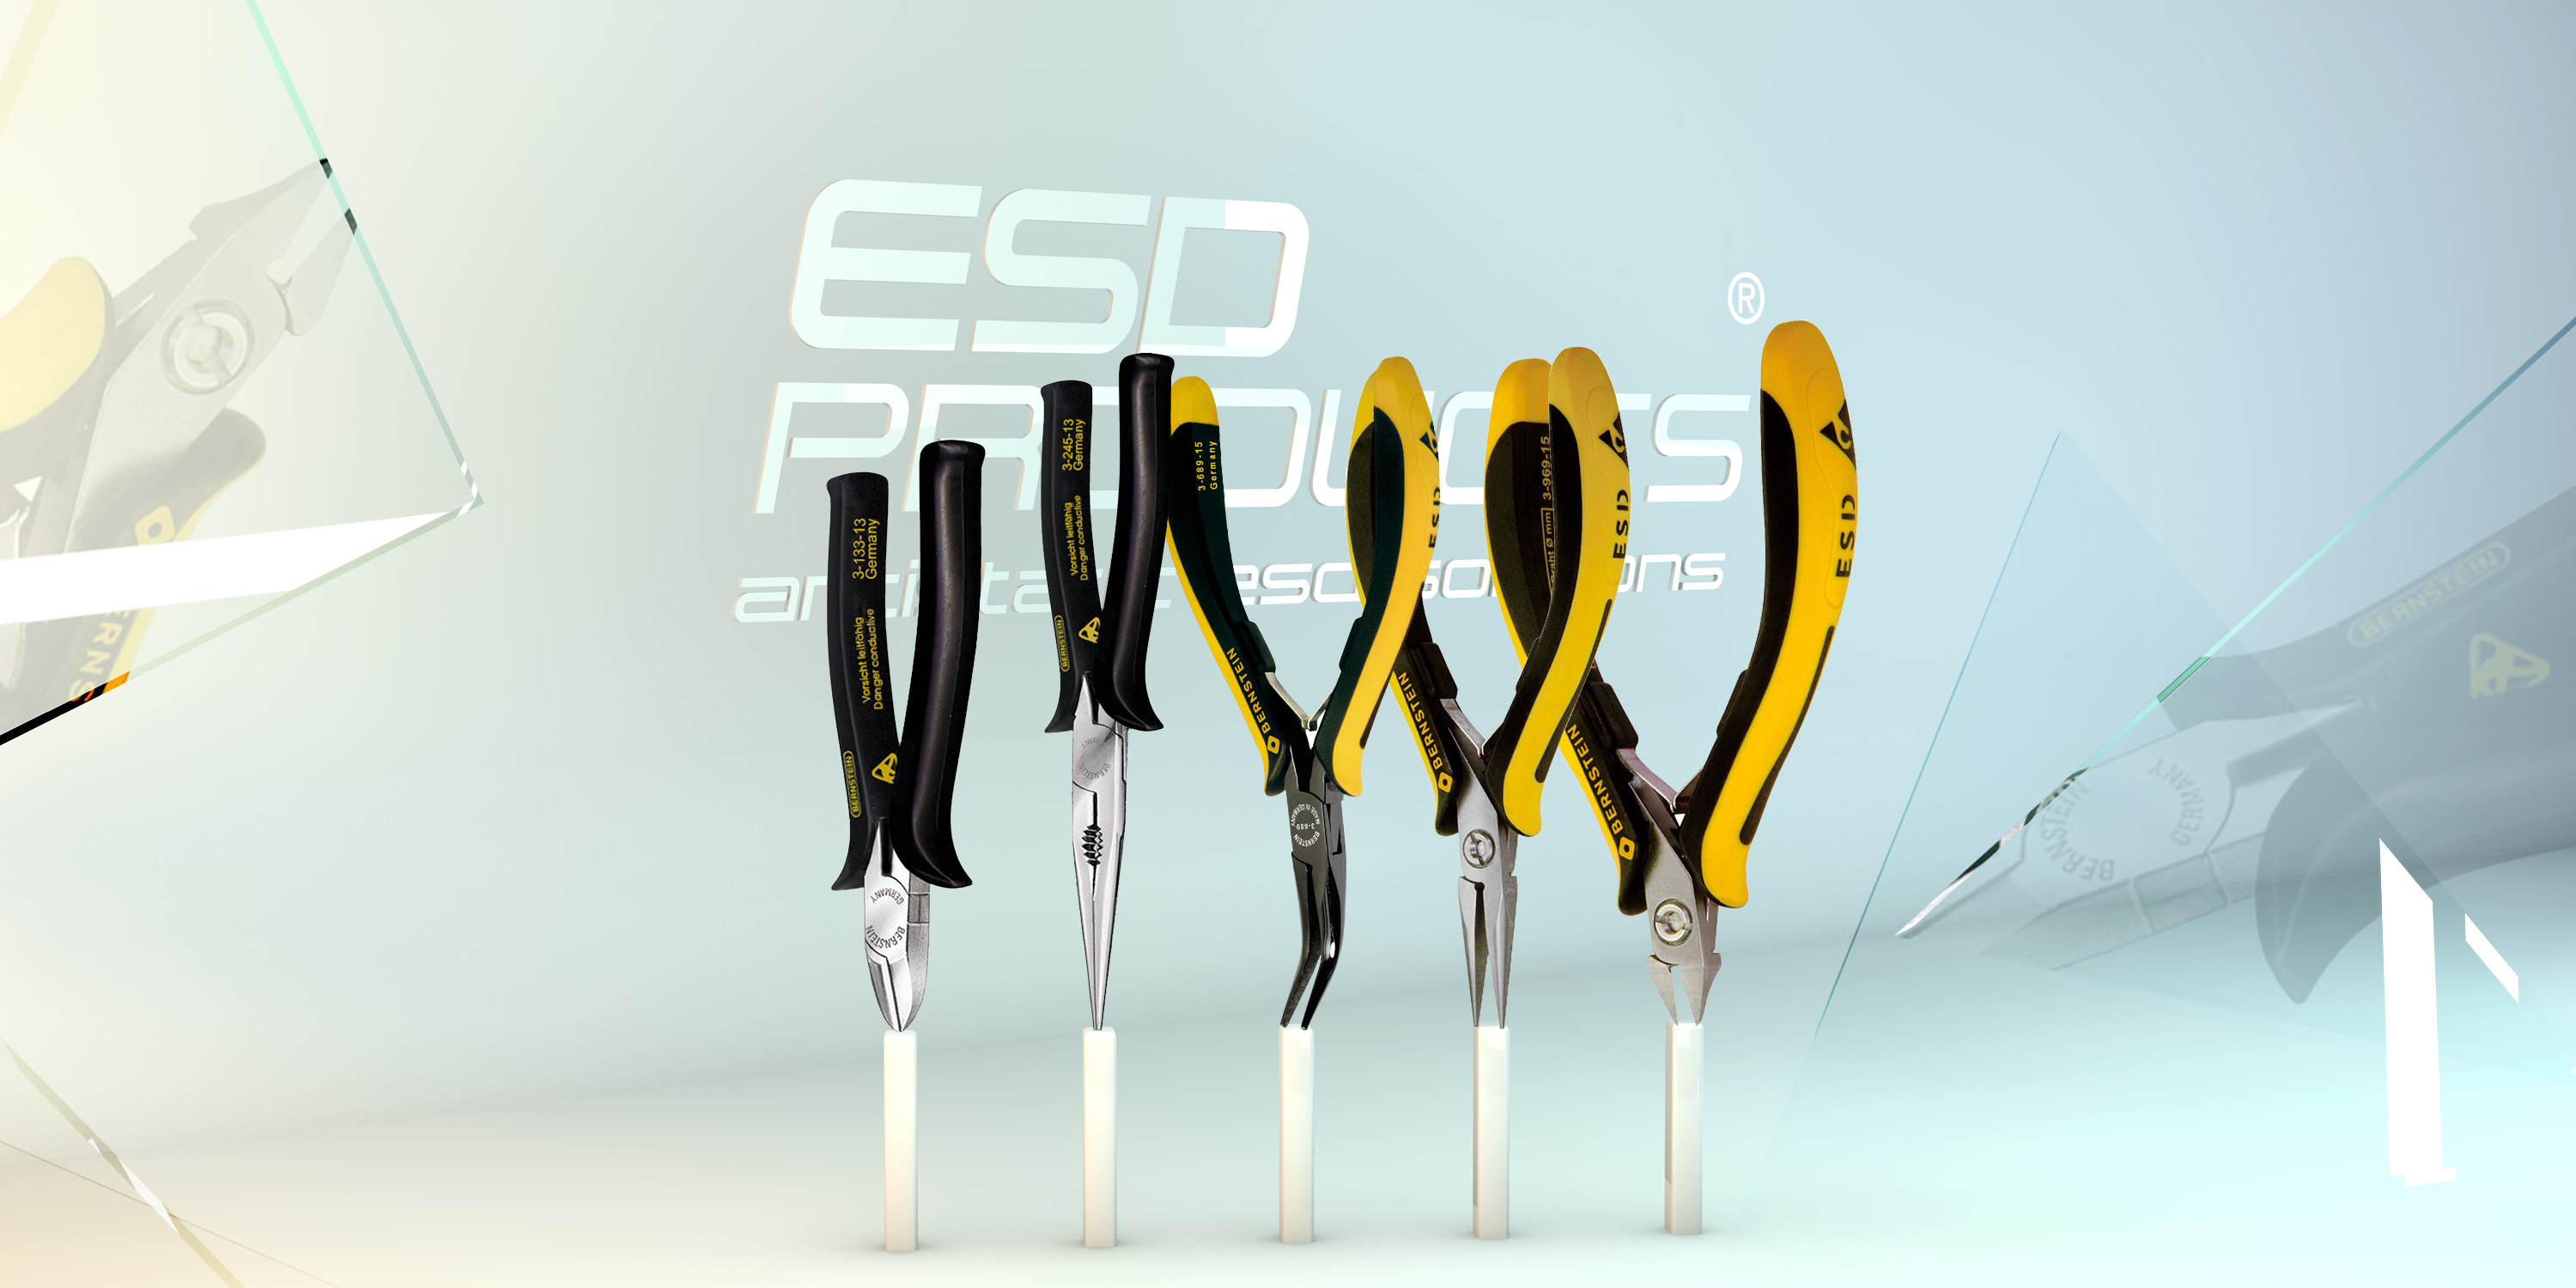 ESD_Pliers_Cutters_Concept